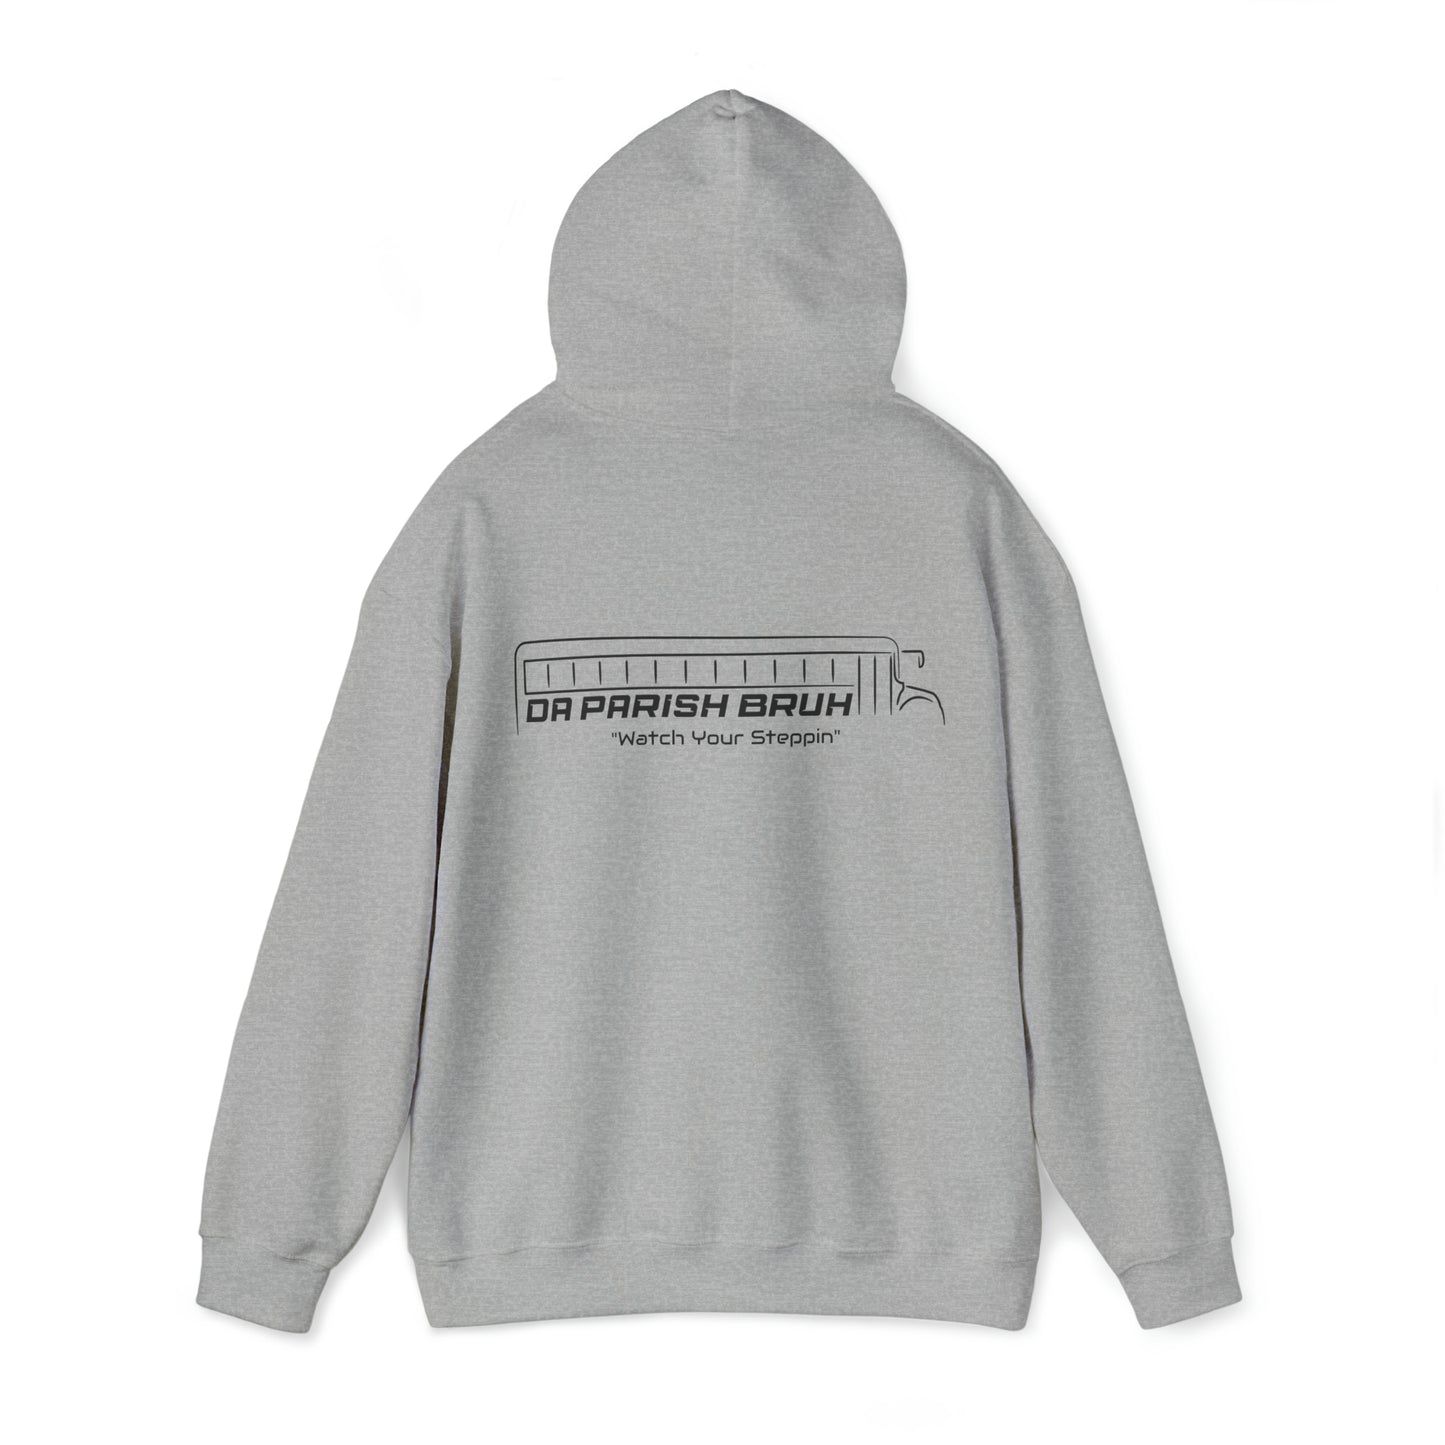 "Watch Your Steppin" Hoodie